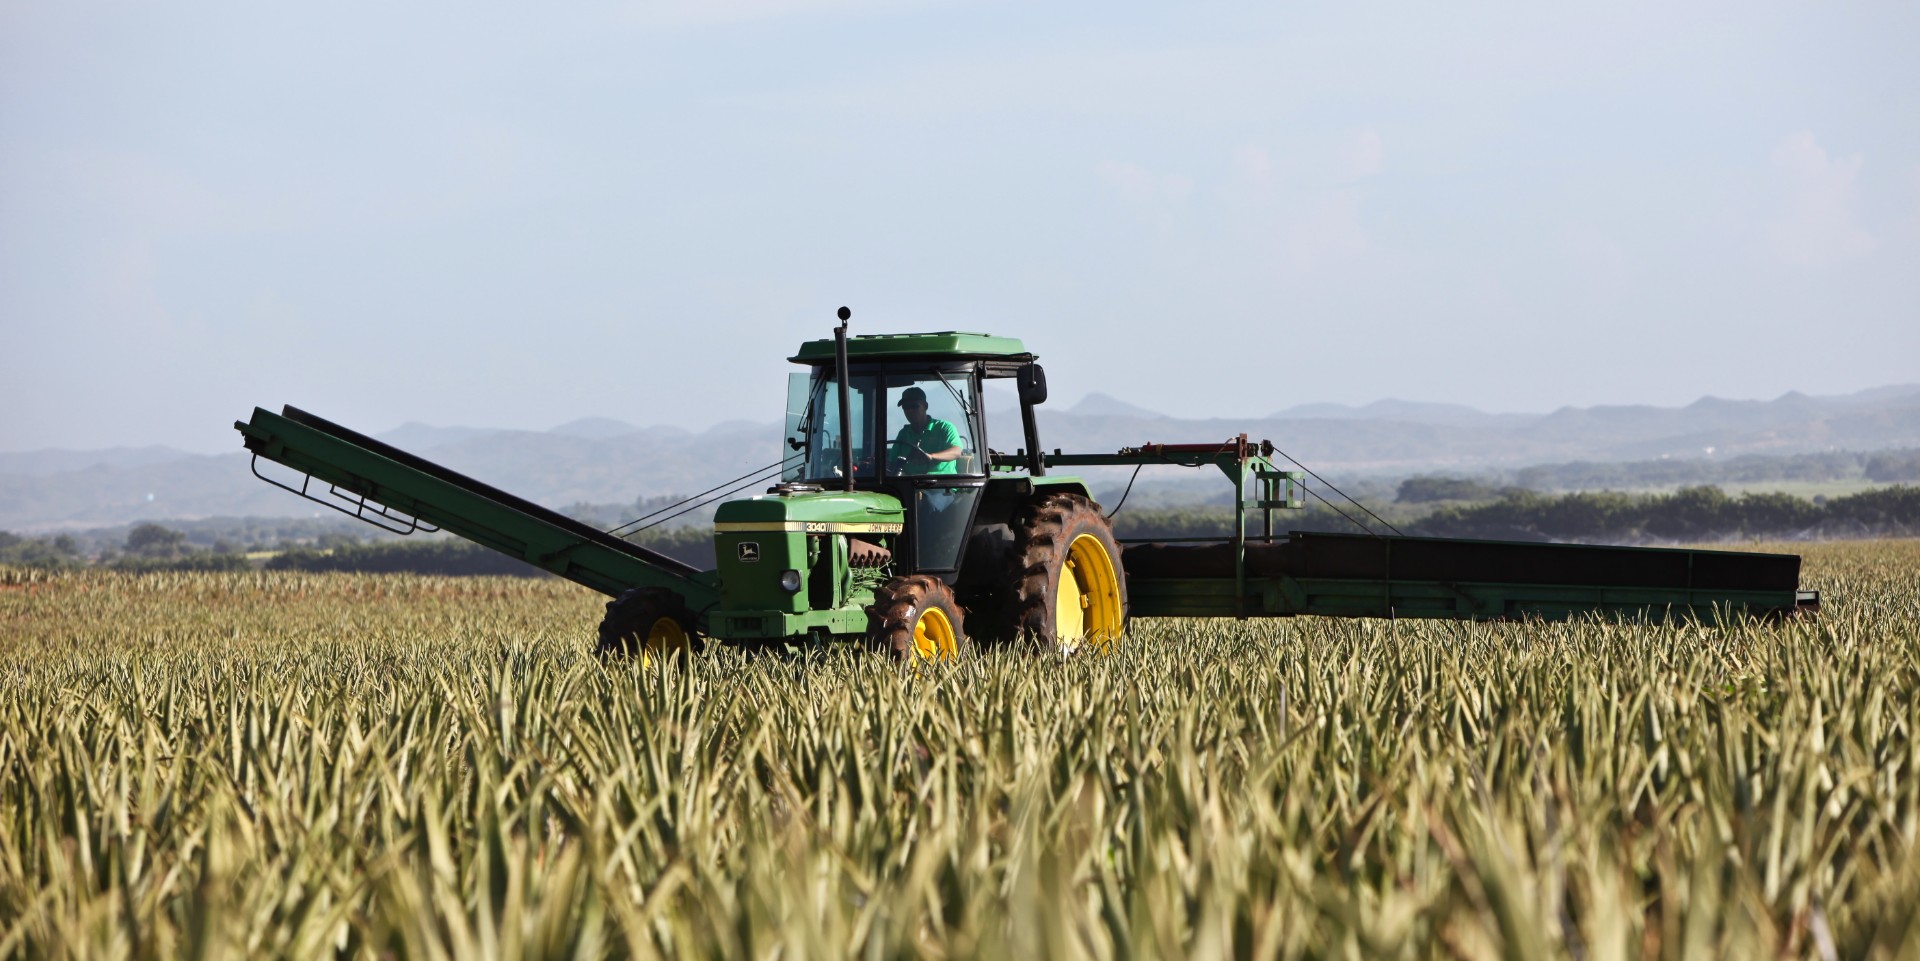 Tractor Safety Precautions for Agriculture Workers